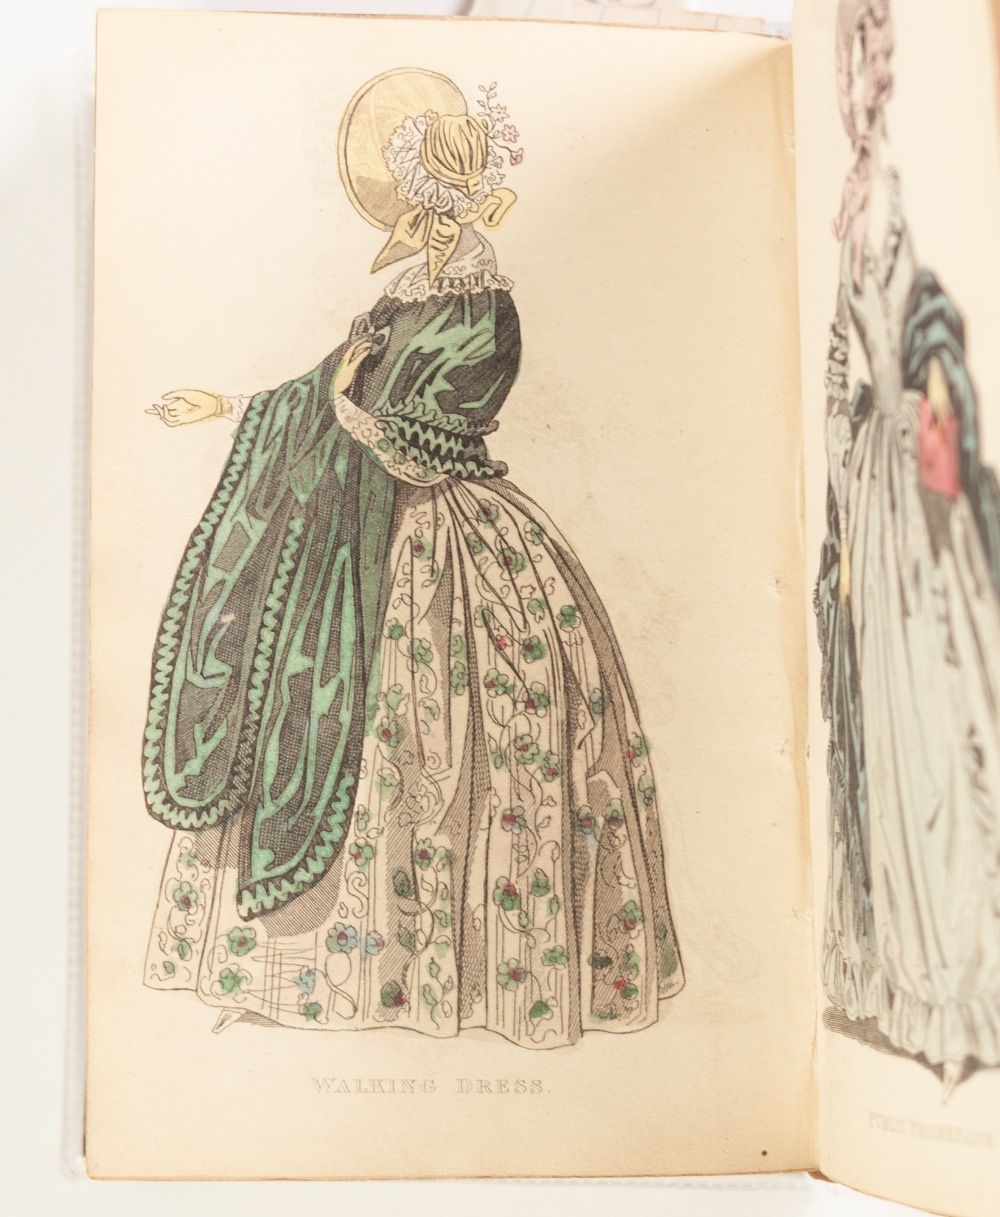 LADIES CABINET OF FASHION, MUSIC AND ROMANCE, Published George Henderson, Vol VII (1842) and vol - Image 7 of 8